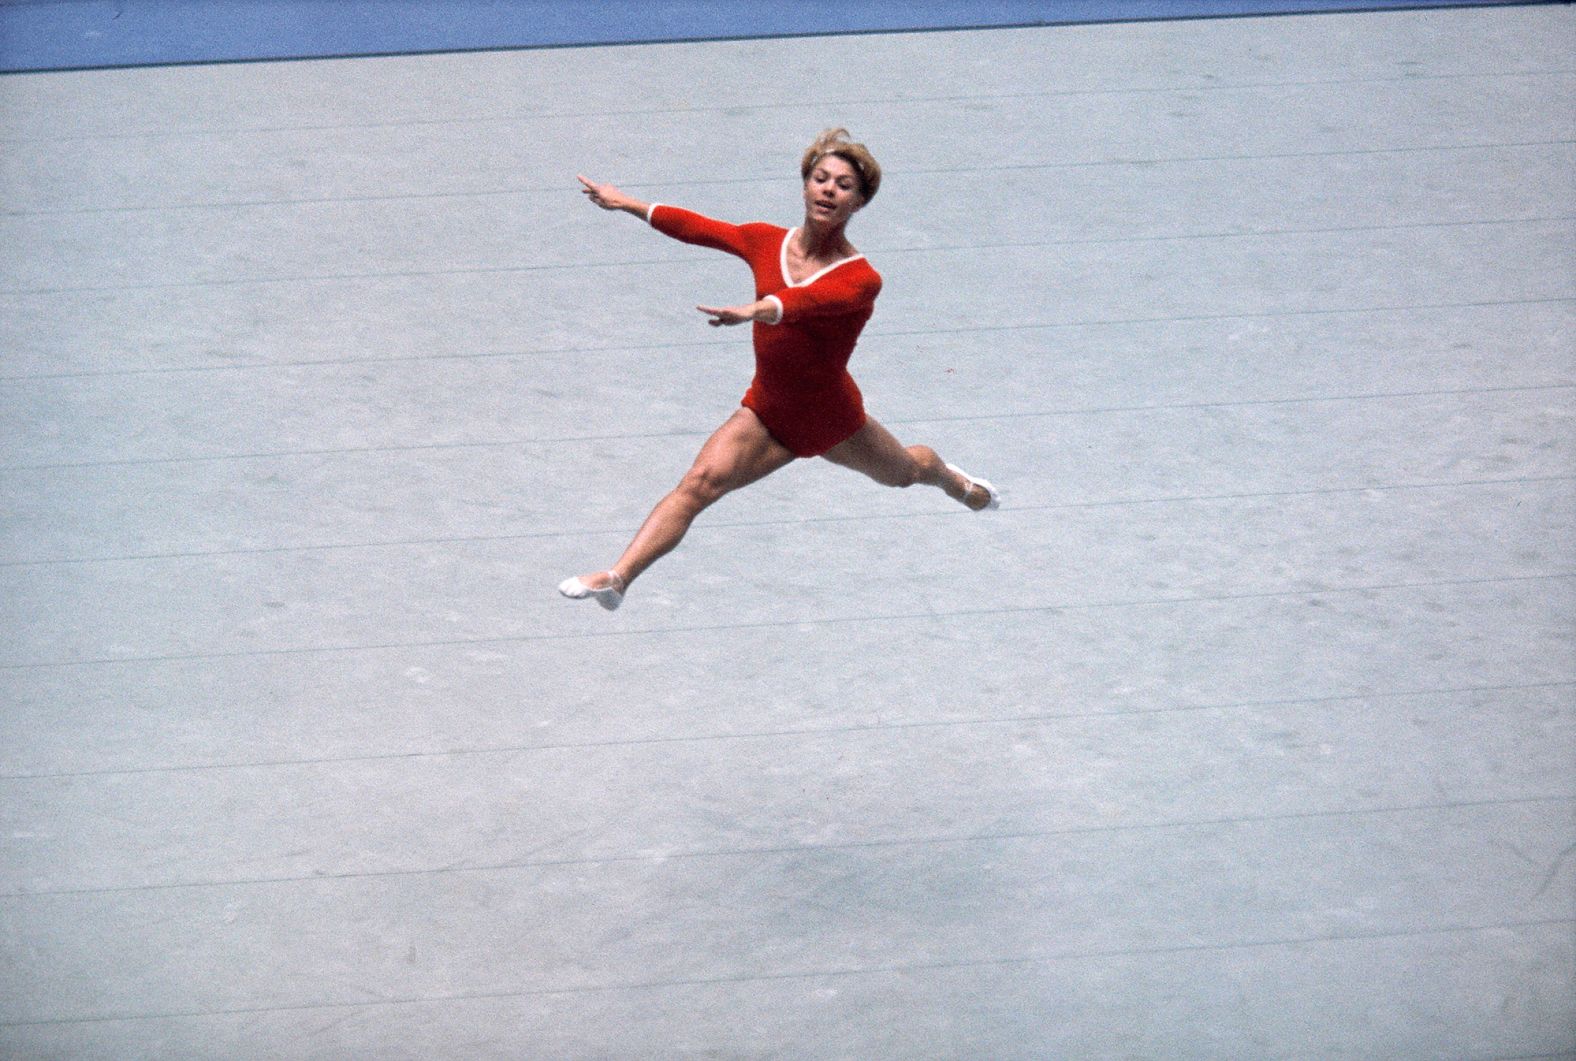 Soviet gymnast Larisa Latynina won six medals in the 1964 Summer Games, giving her a then-record 18 medals — nine of them gold — over three Olympics. Only Michael Phelps has won more Olympic medals.